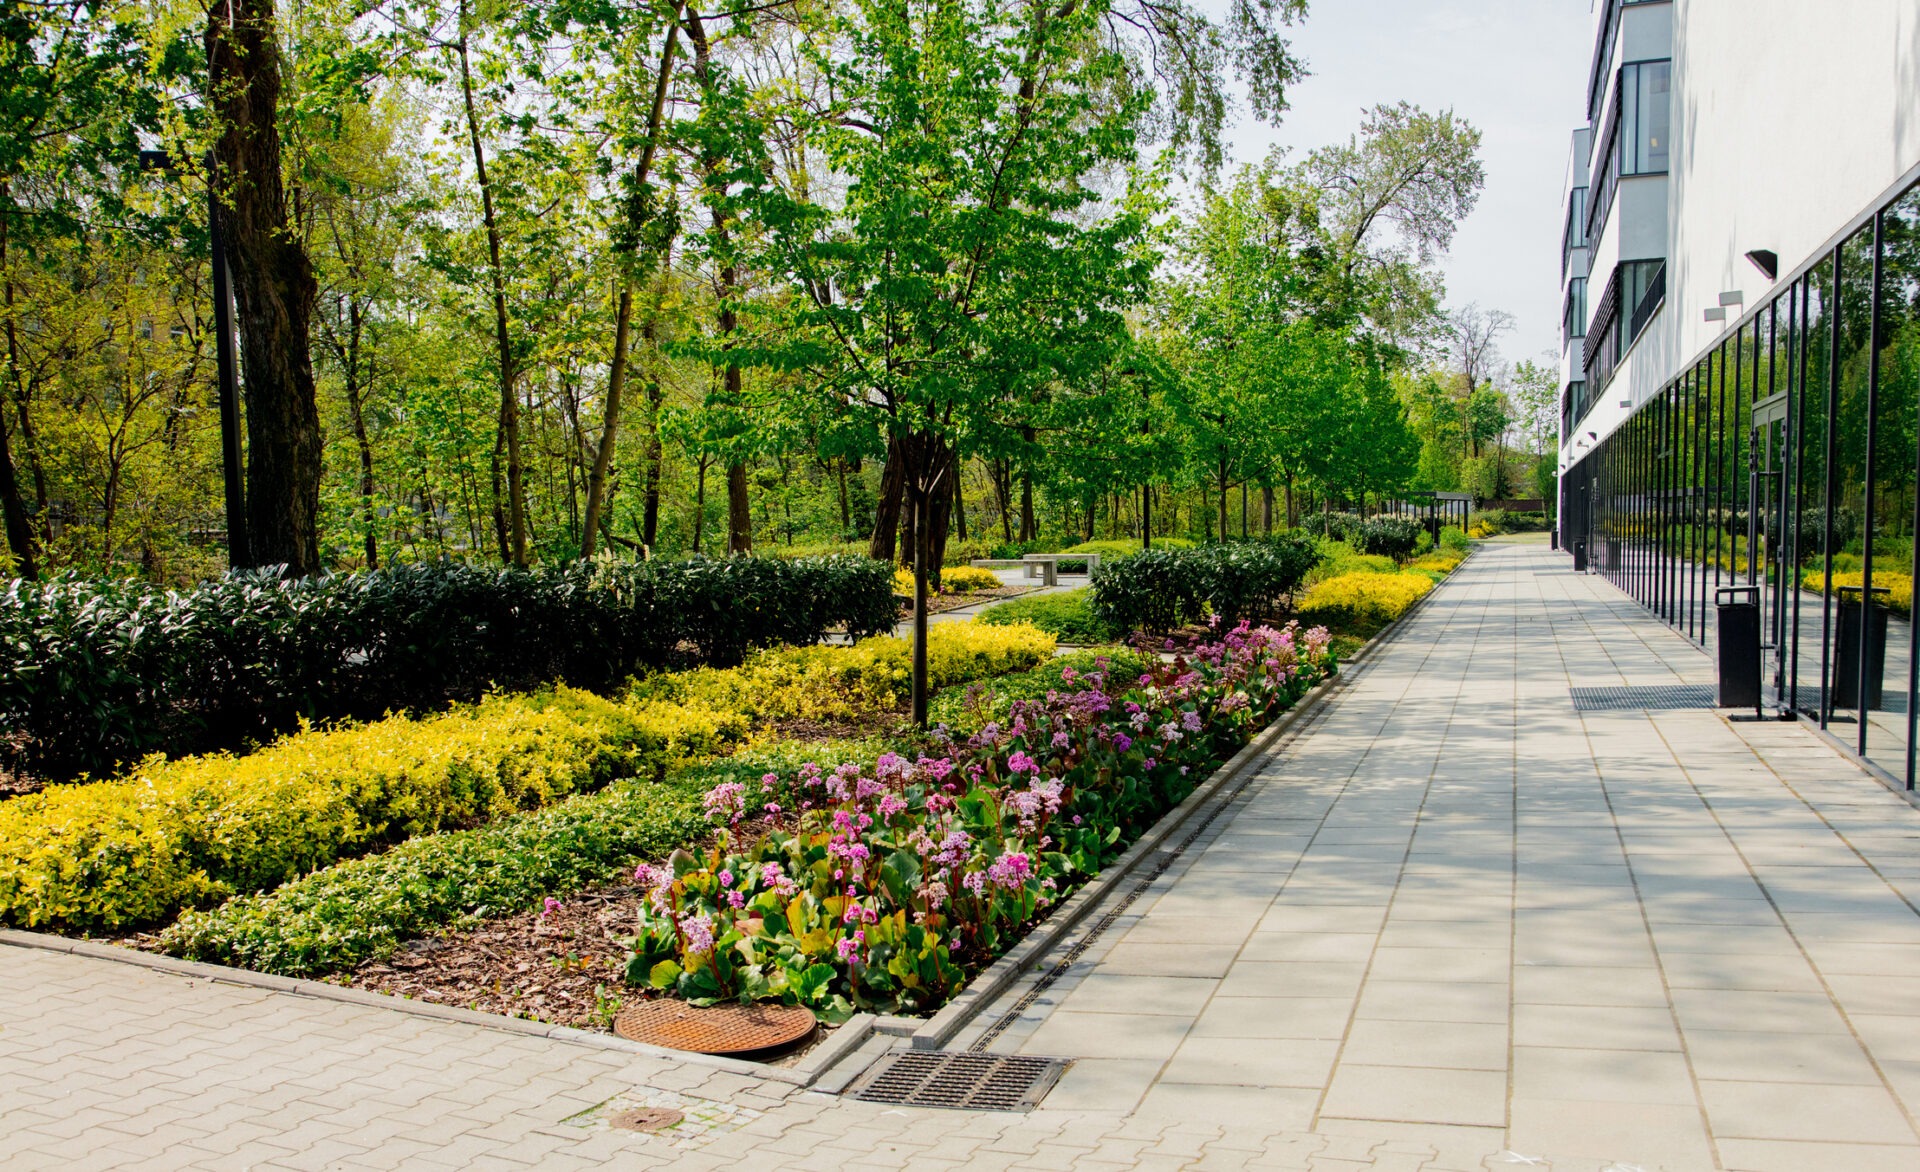 This image shows a paved walkway beside a modern building, flanked by colorful flower beds and lush green trees under a clear blue sky.